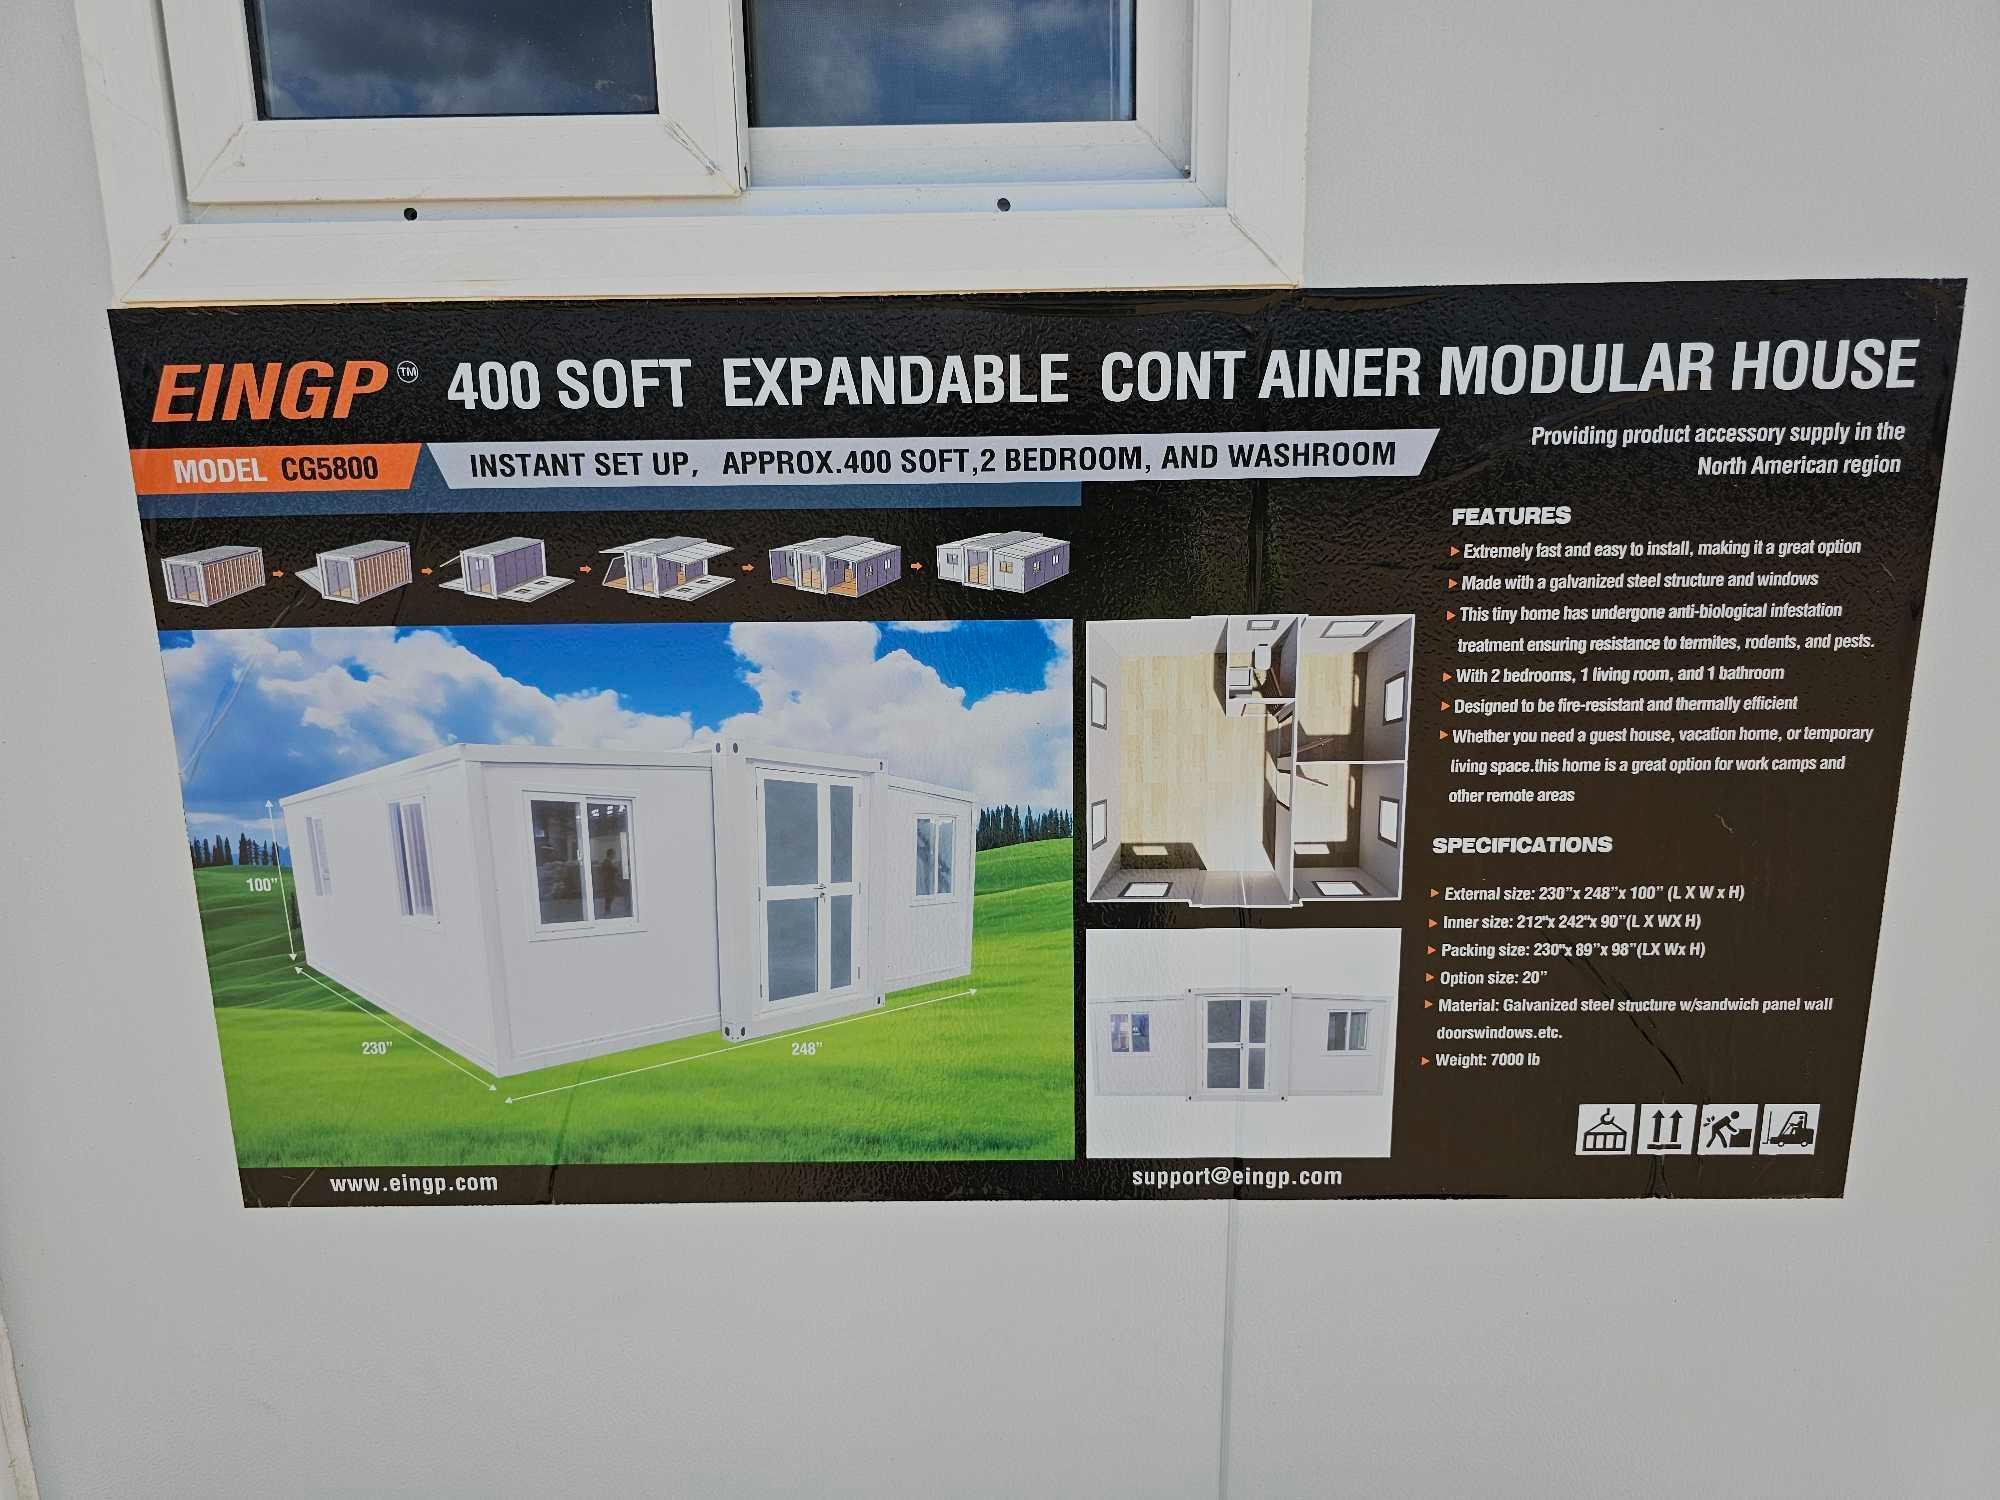 596 - ABSOLUTE - CONTAINER MODULAR HOUSE